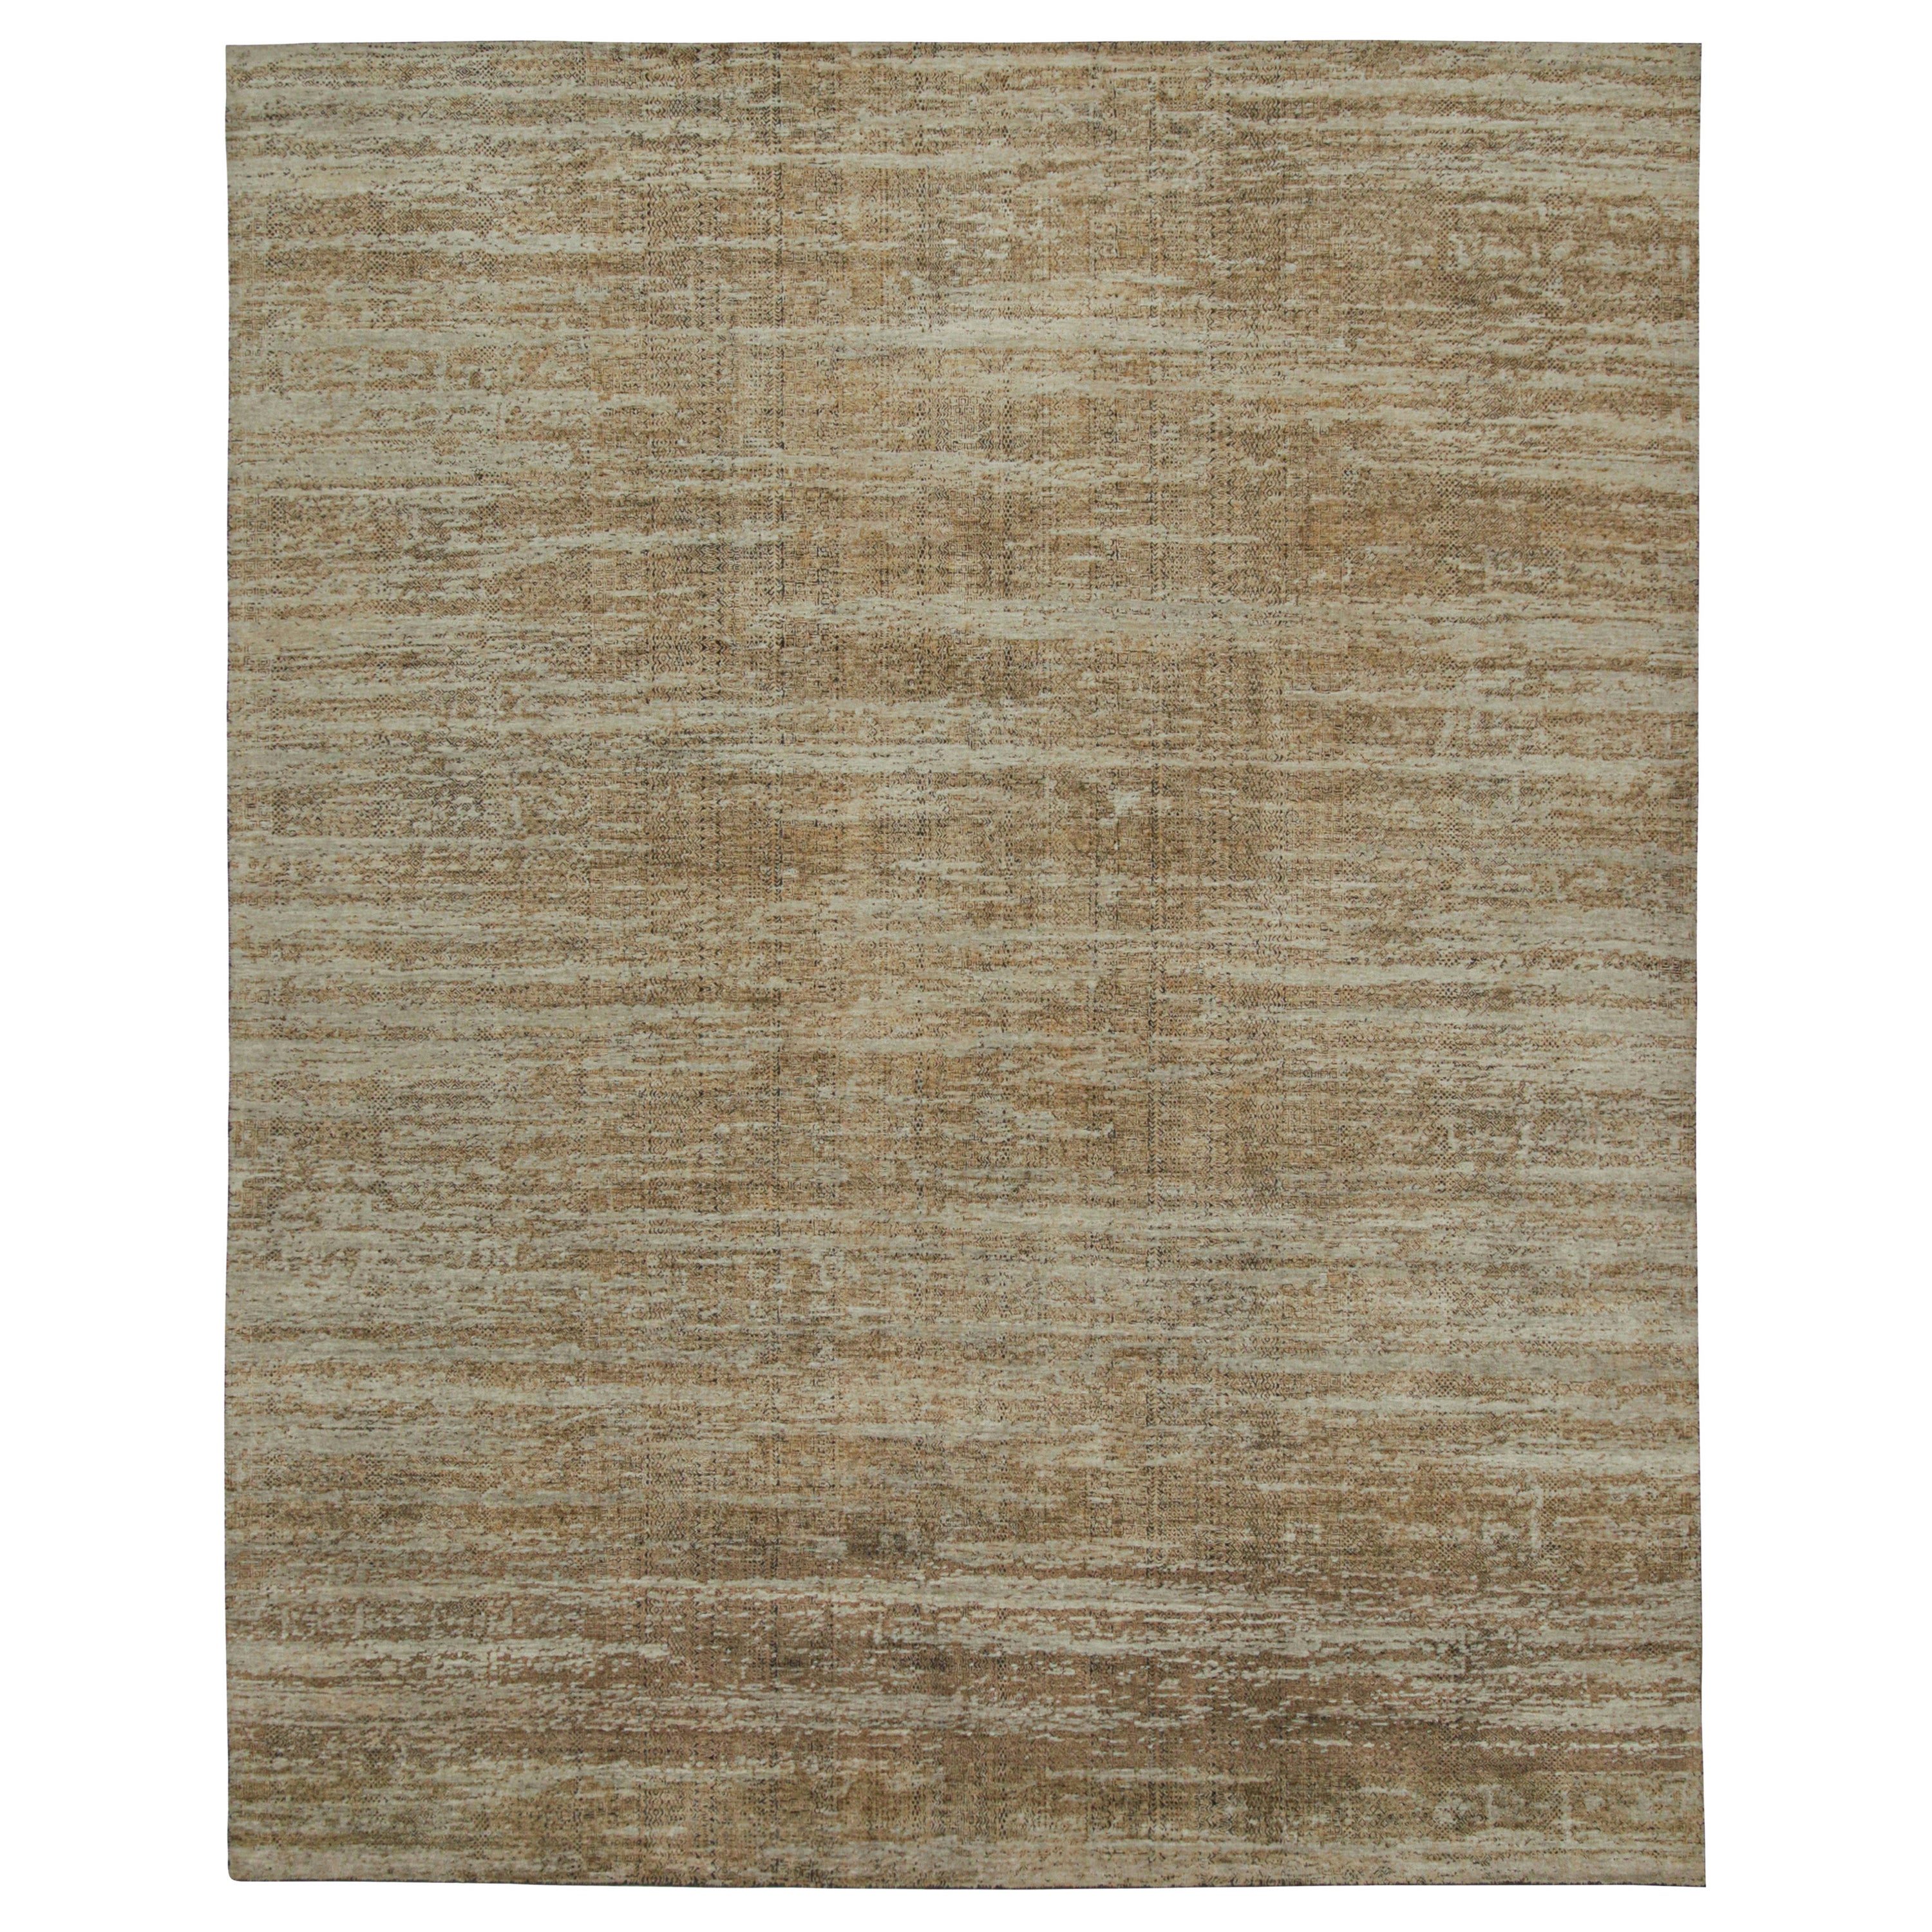 Rug & Kilim’s Abstract Rug in Beige-Brown and Black Geometric Patterns For Sale